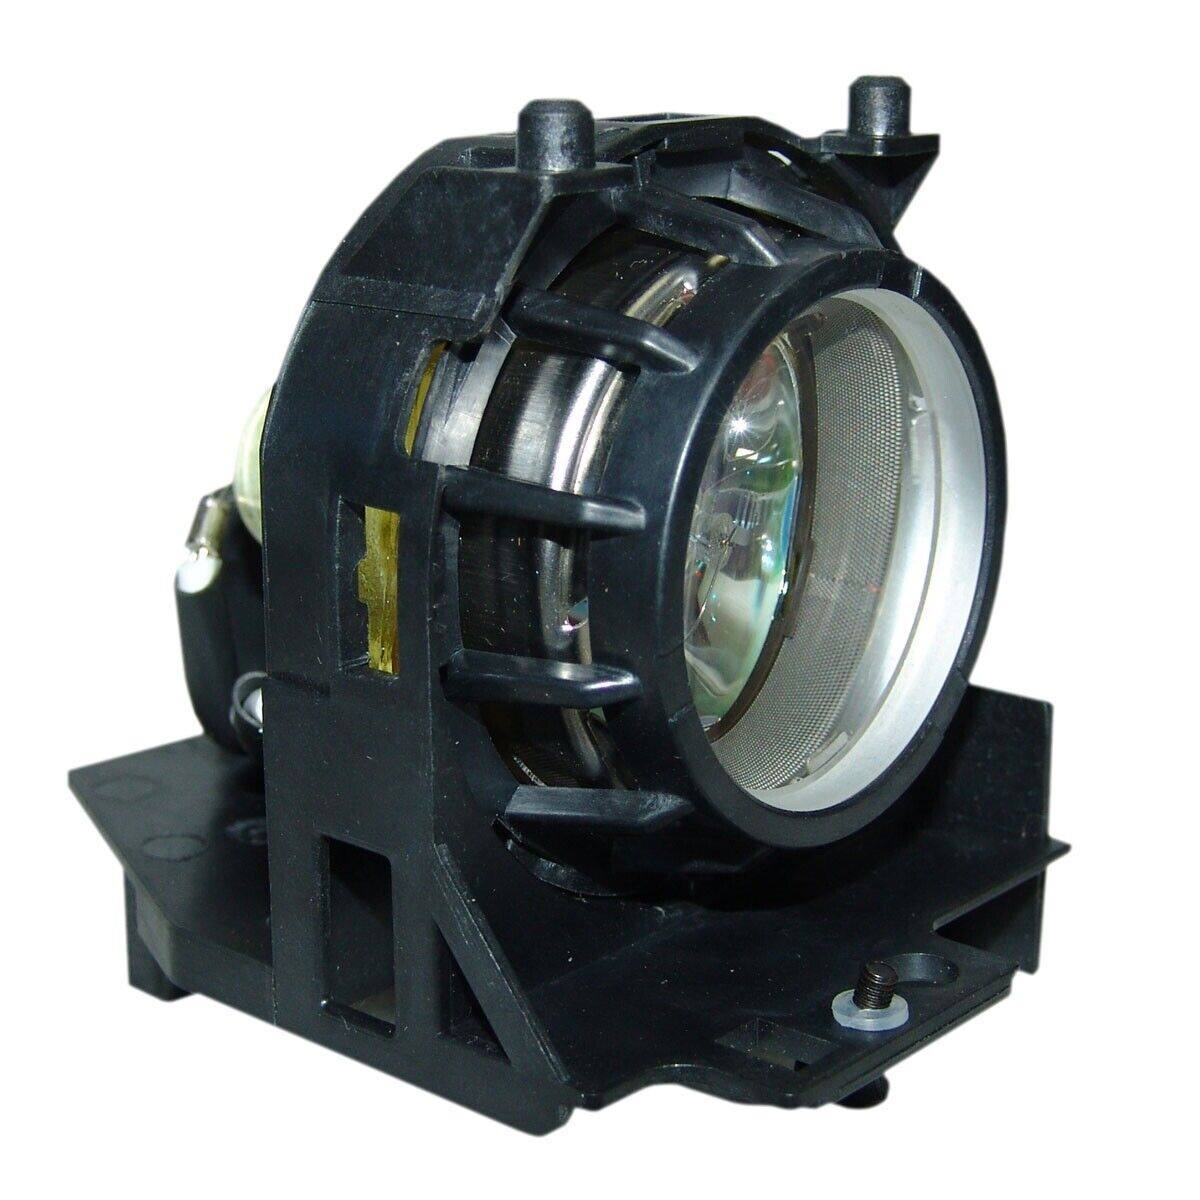 Replacement Projector lamp 78-6969-9693-9 for PROJECTOR 3M H10 / S10